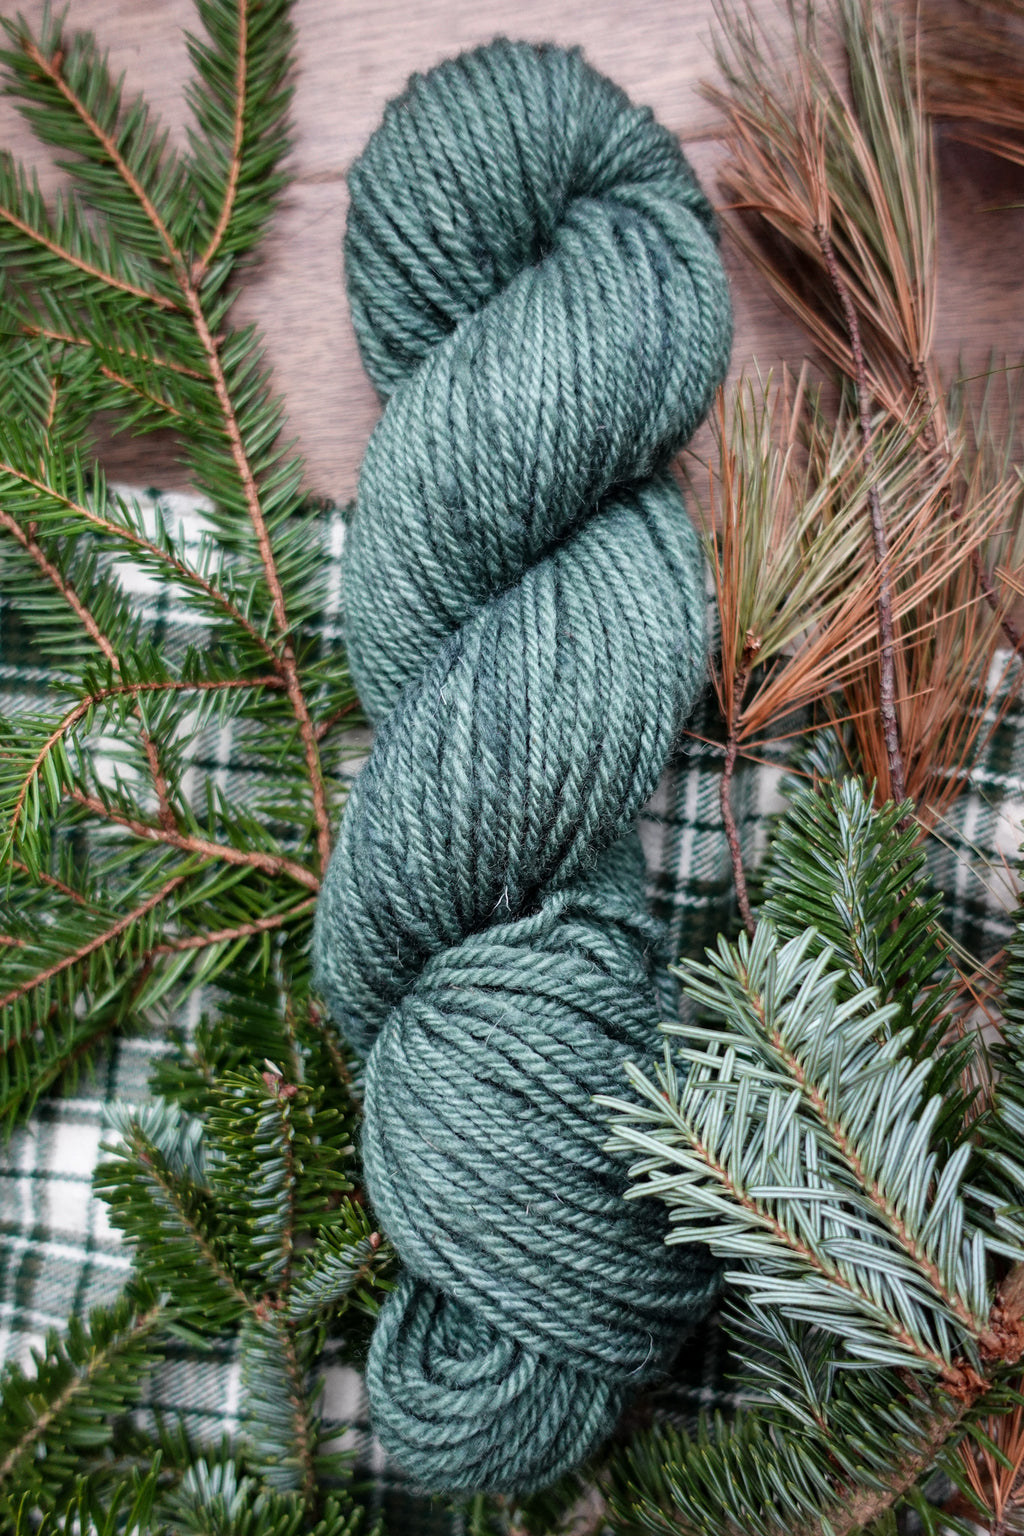 A skein of worsted weight yarn has been hand dyed blue green. It lays on a tabletop next to spruce branches.